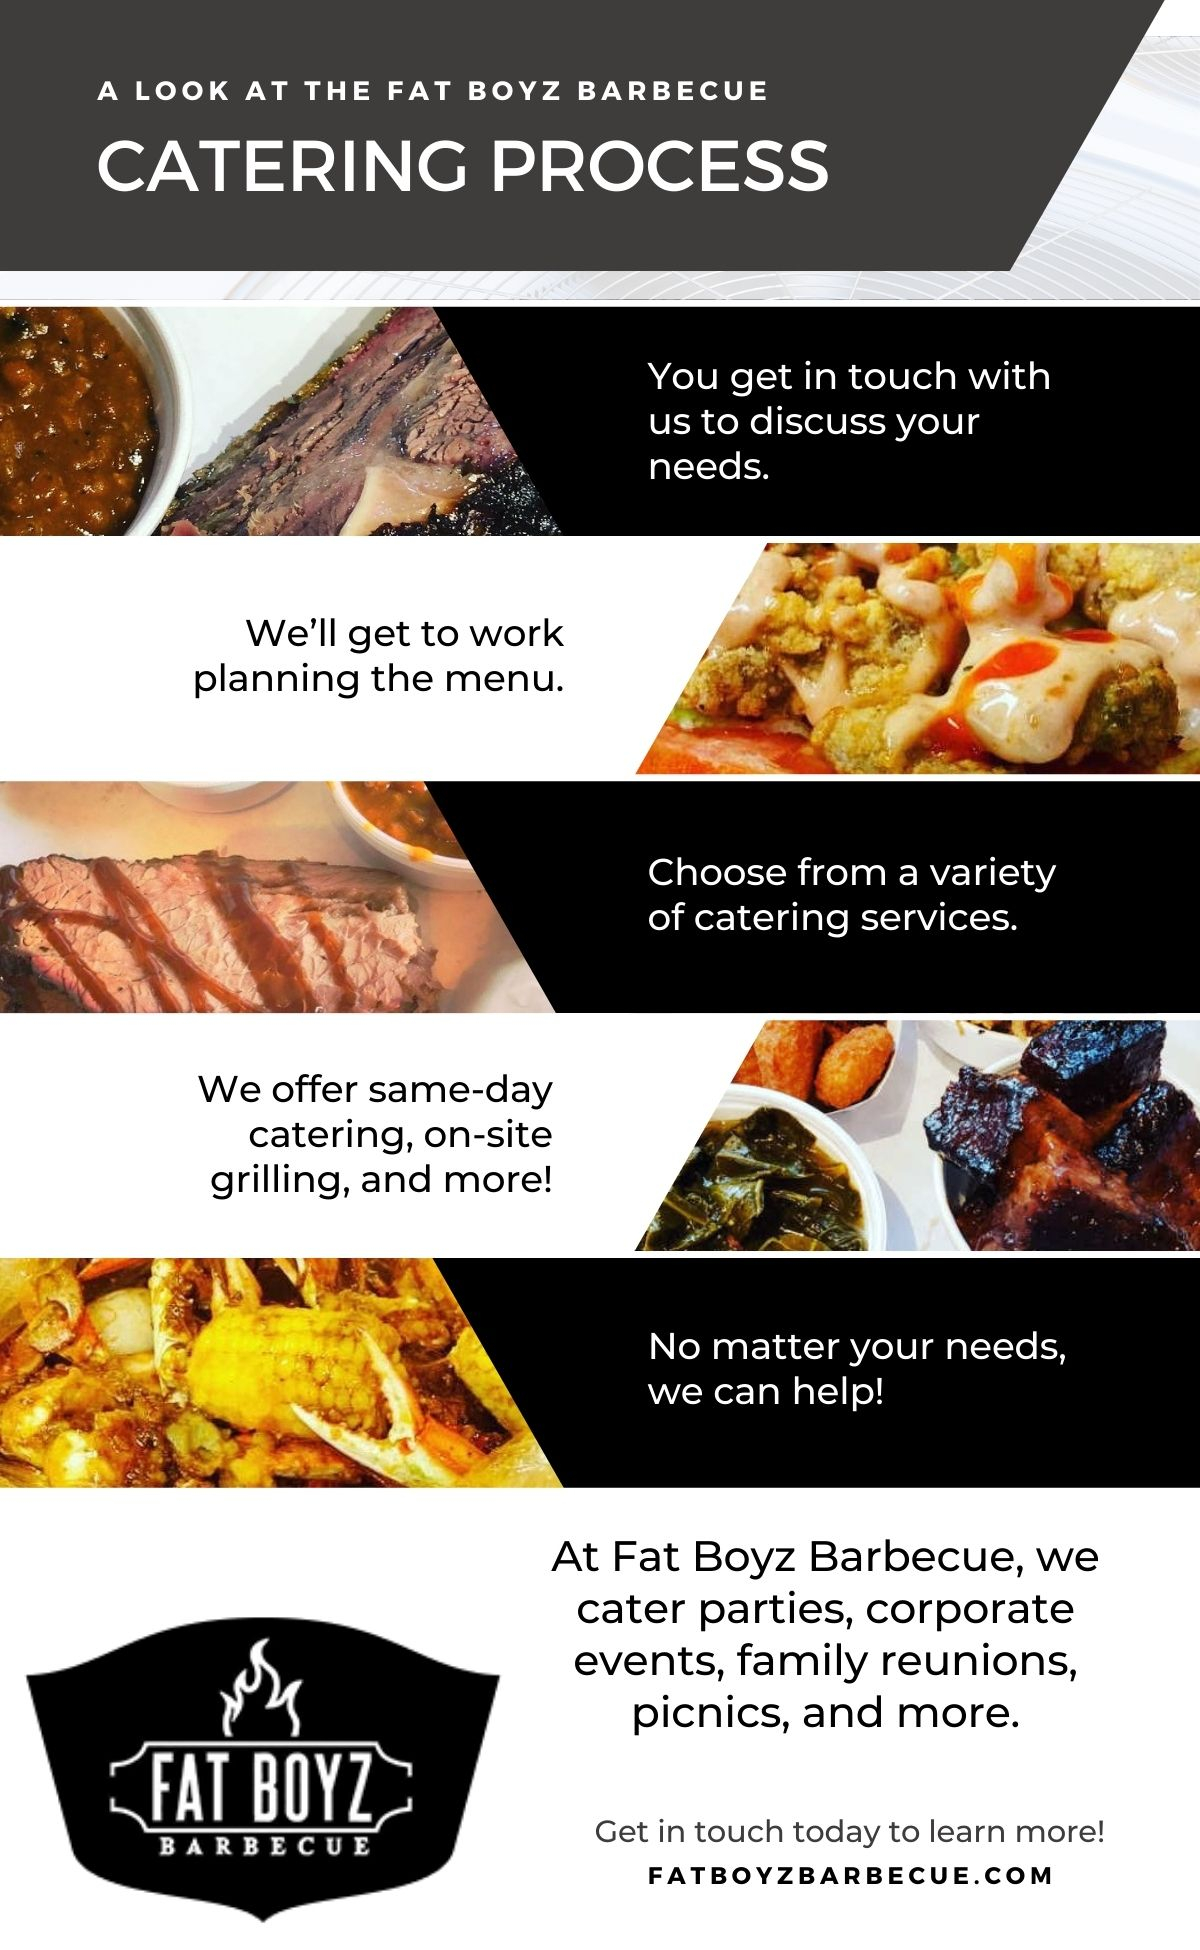 Fat Boyz Barbecue Catering Process infograhic